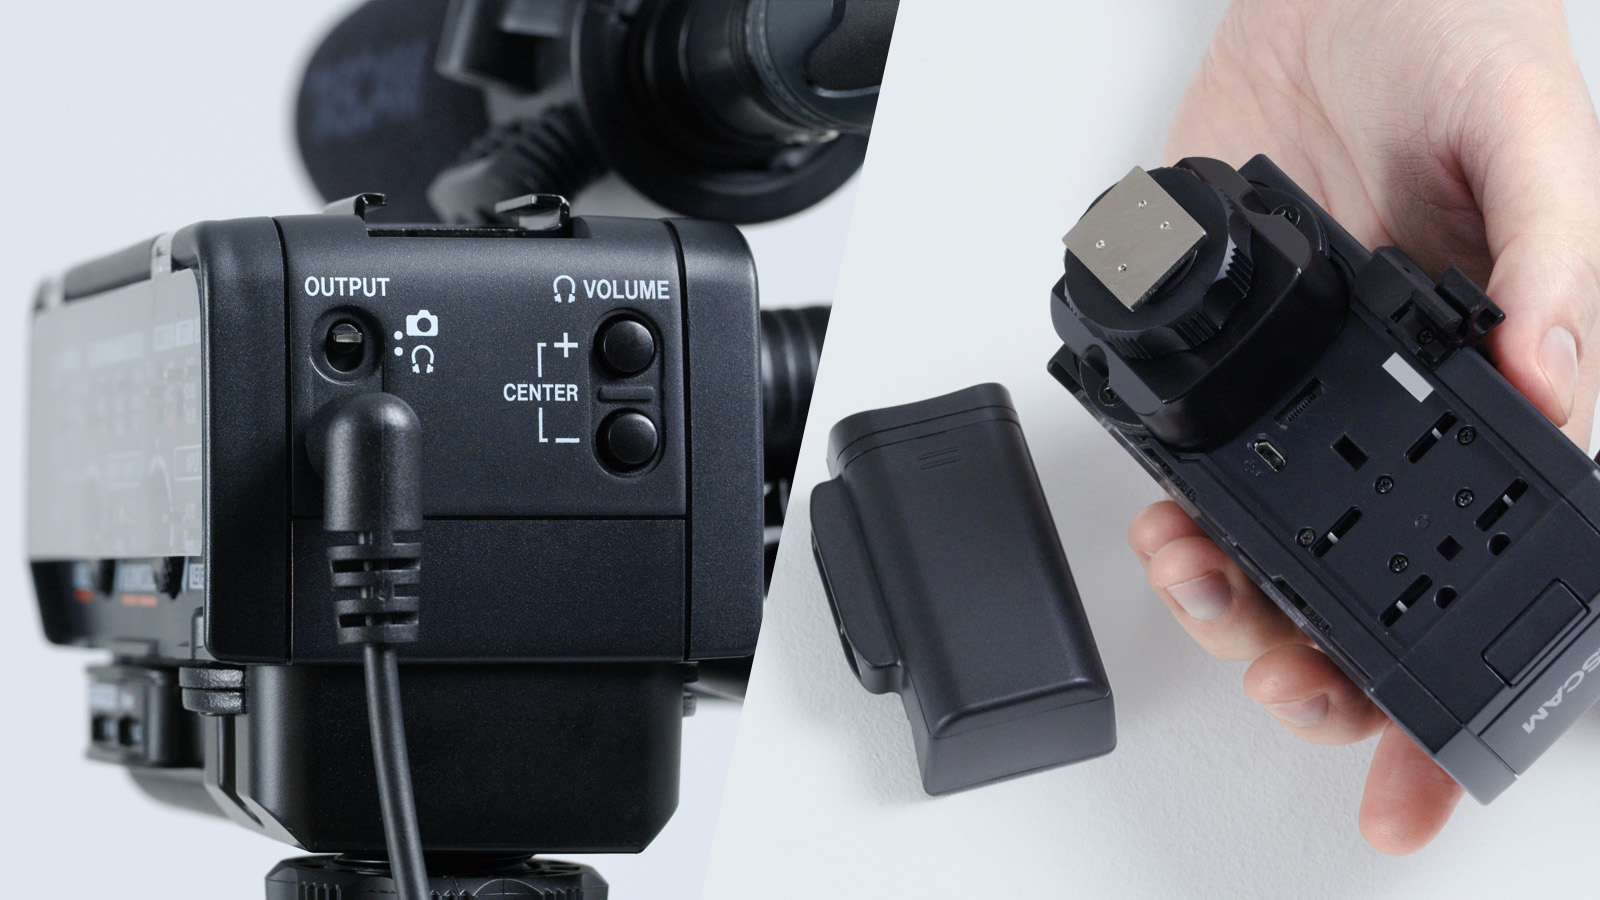 Achieve High-quality Sound Recording With Your Current Camera